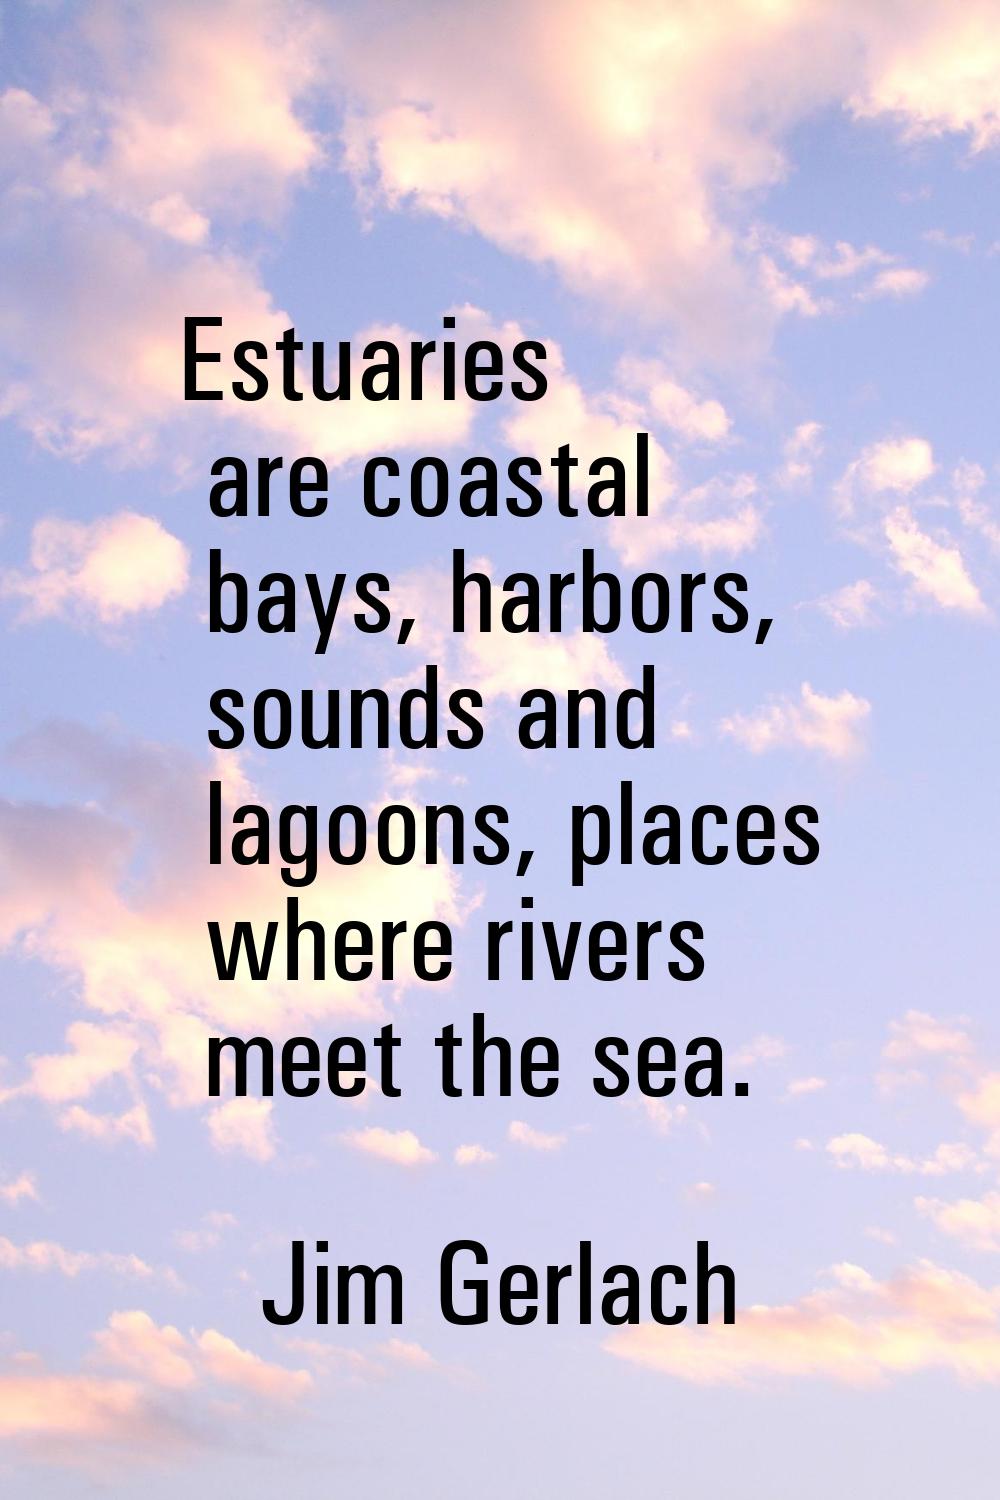 Estuaries are coastal bays, harbors, sounds and lagoons, places where rivers meet the sea.